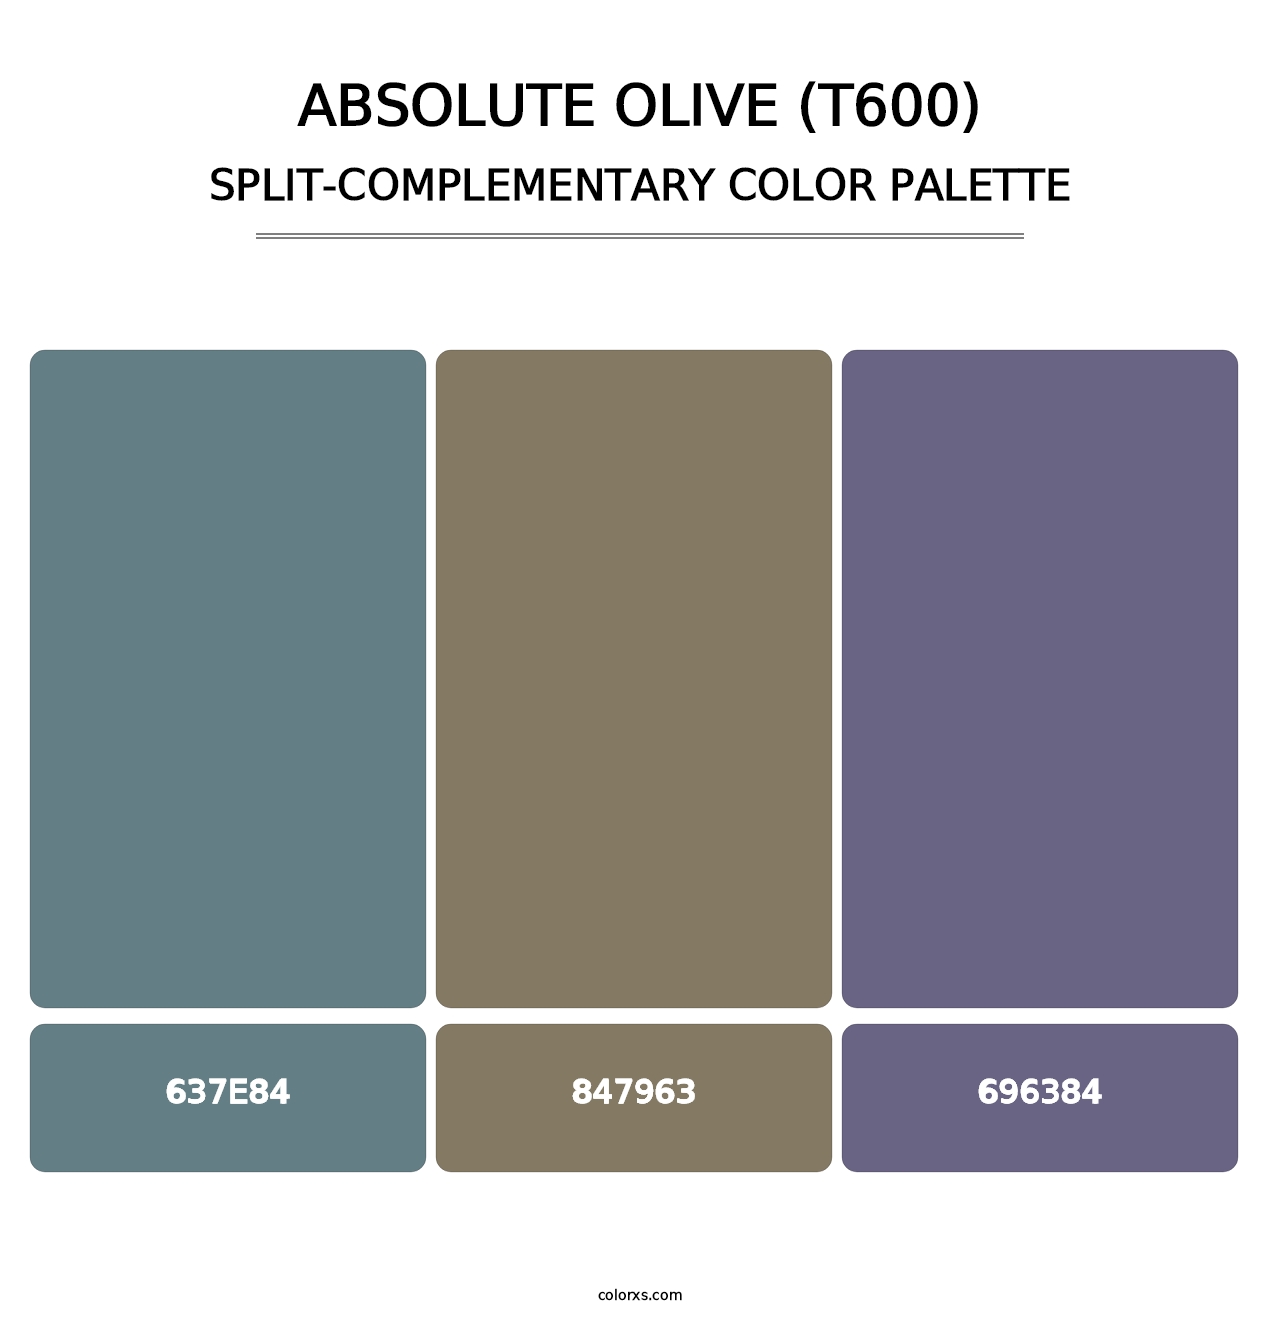 Absolute Olive (T600) - Split-Complementary Color Palette